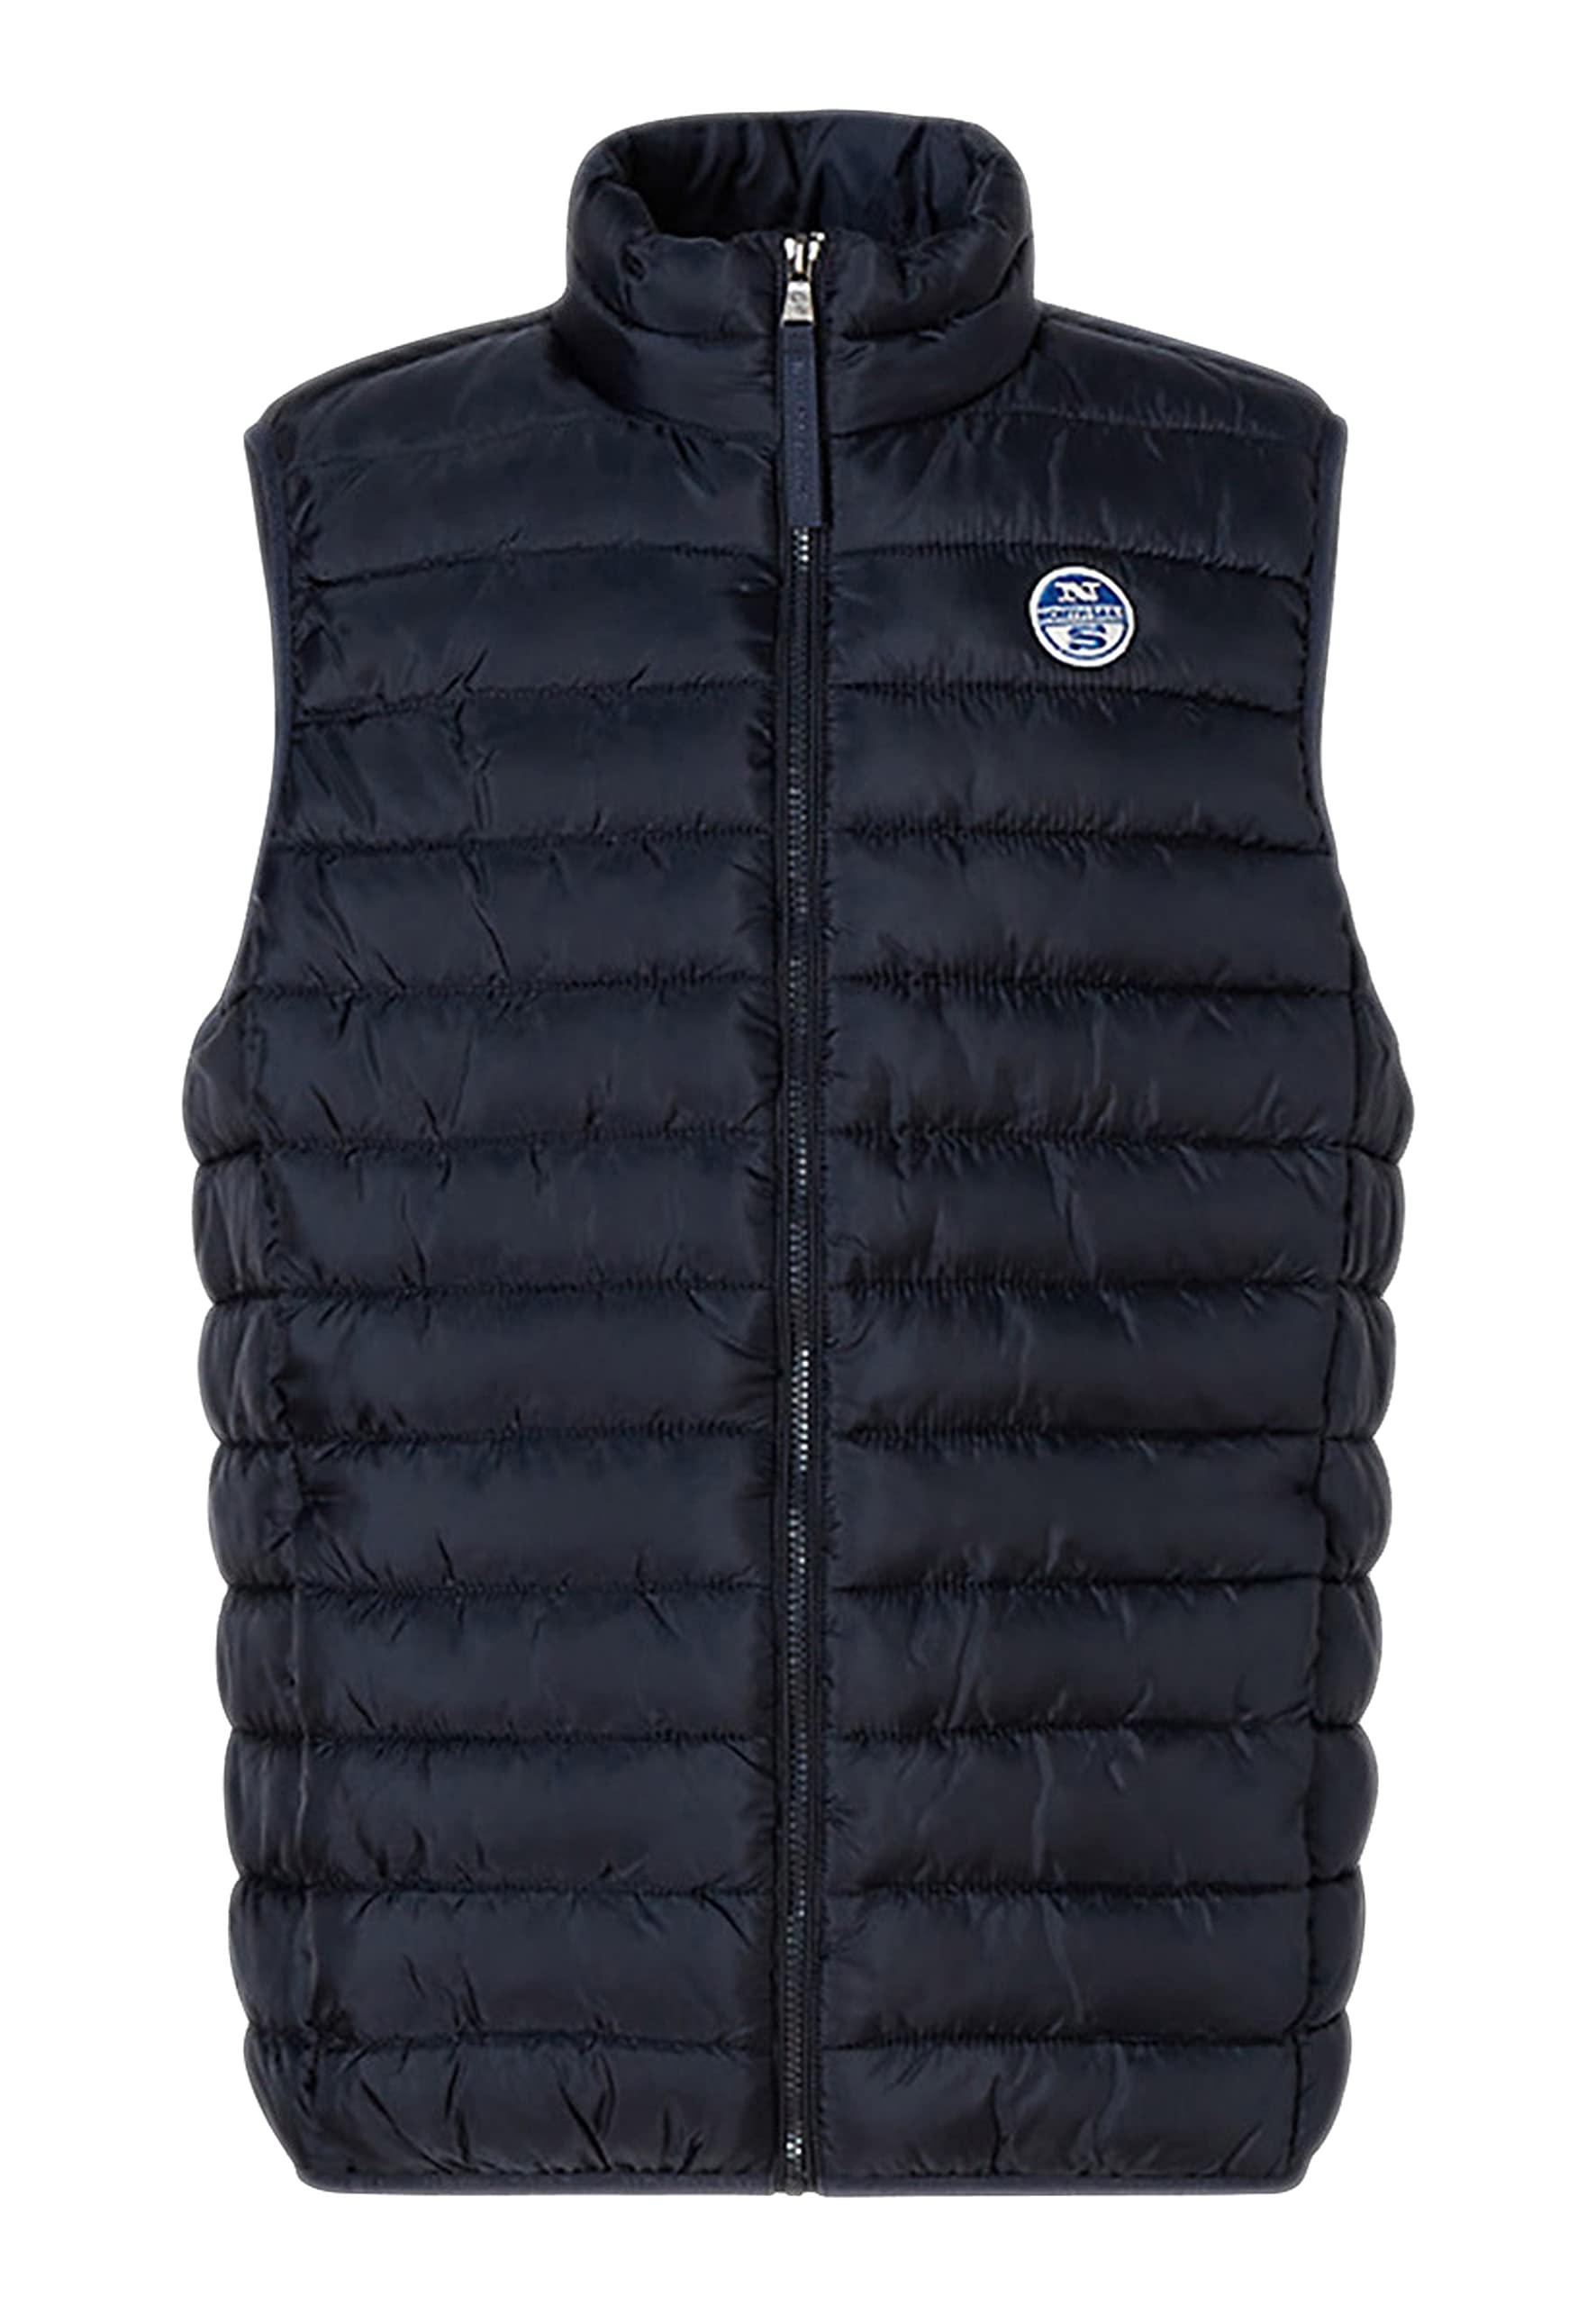 NORTH SAILS - Men's padded sleeveless down jacket with logo - Size M